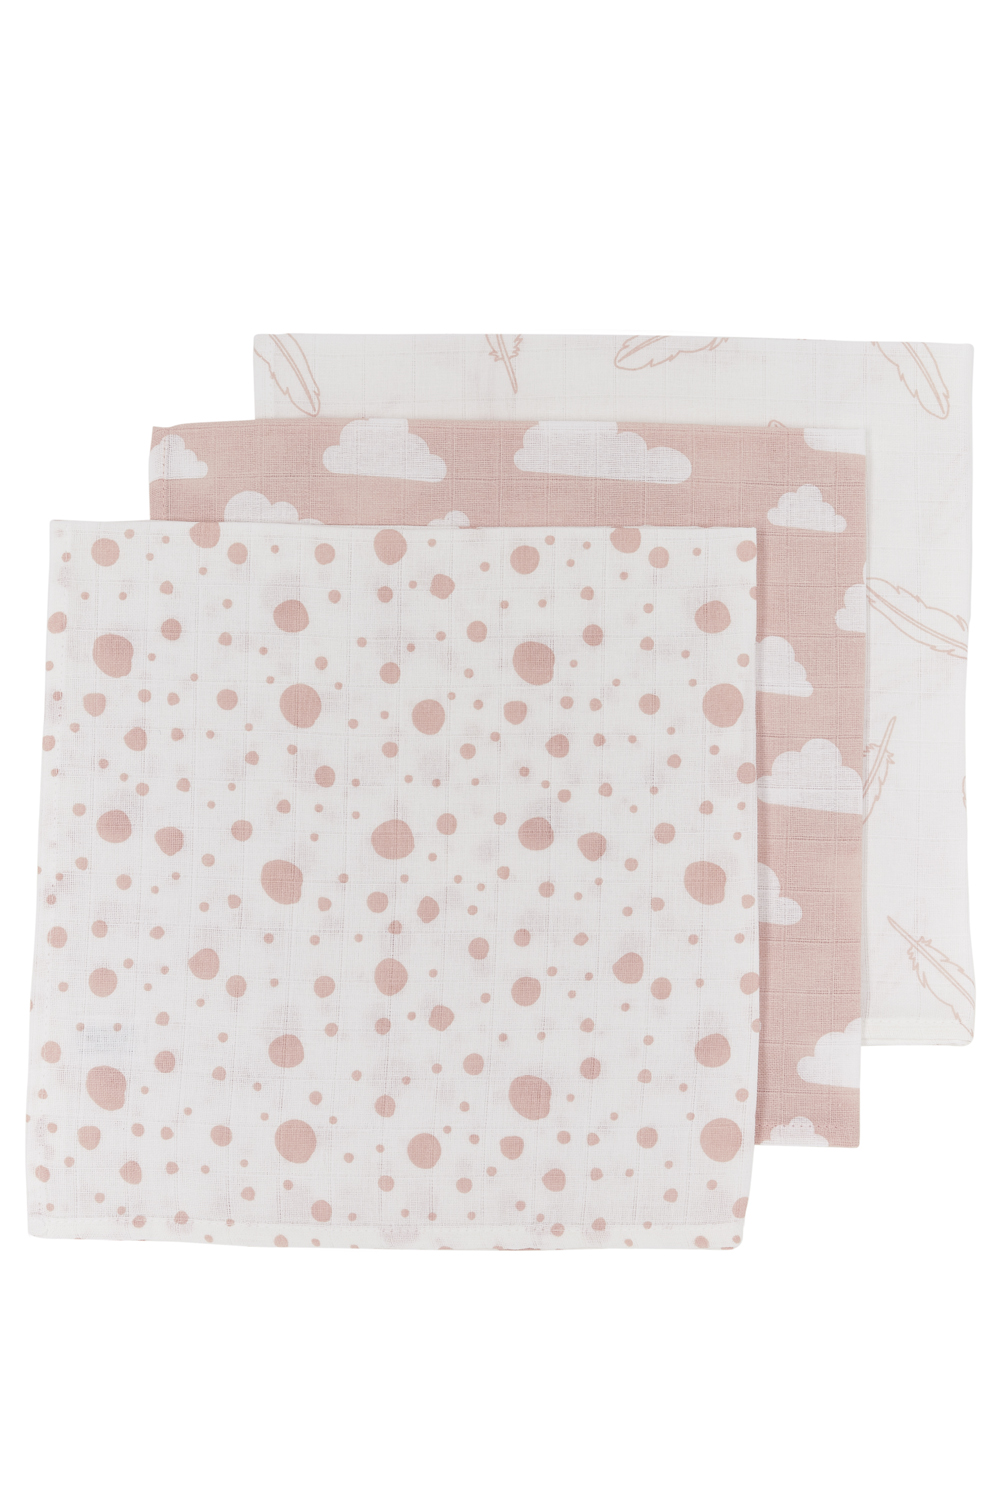 Facecloth 3-pack muslin Clouds/Dots/Feathers - pink - 30x30cm